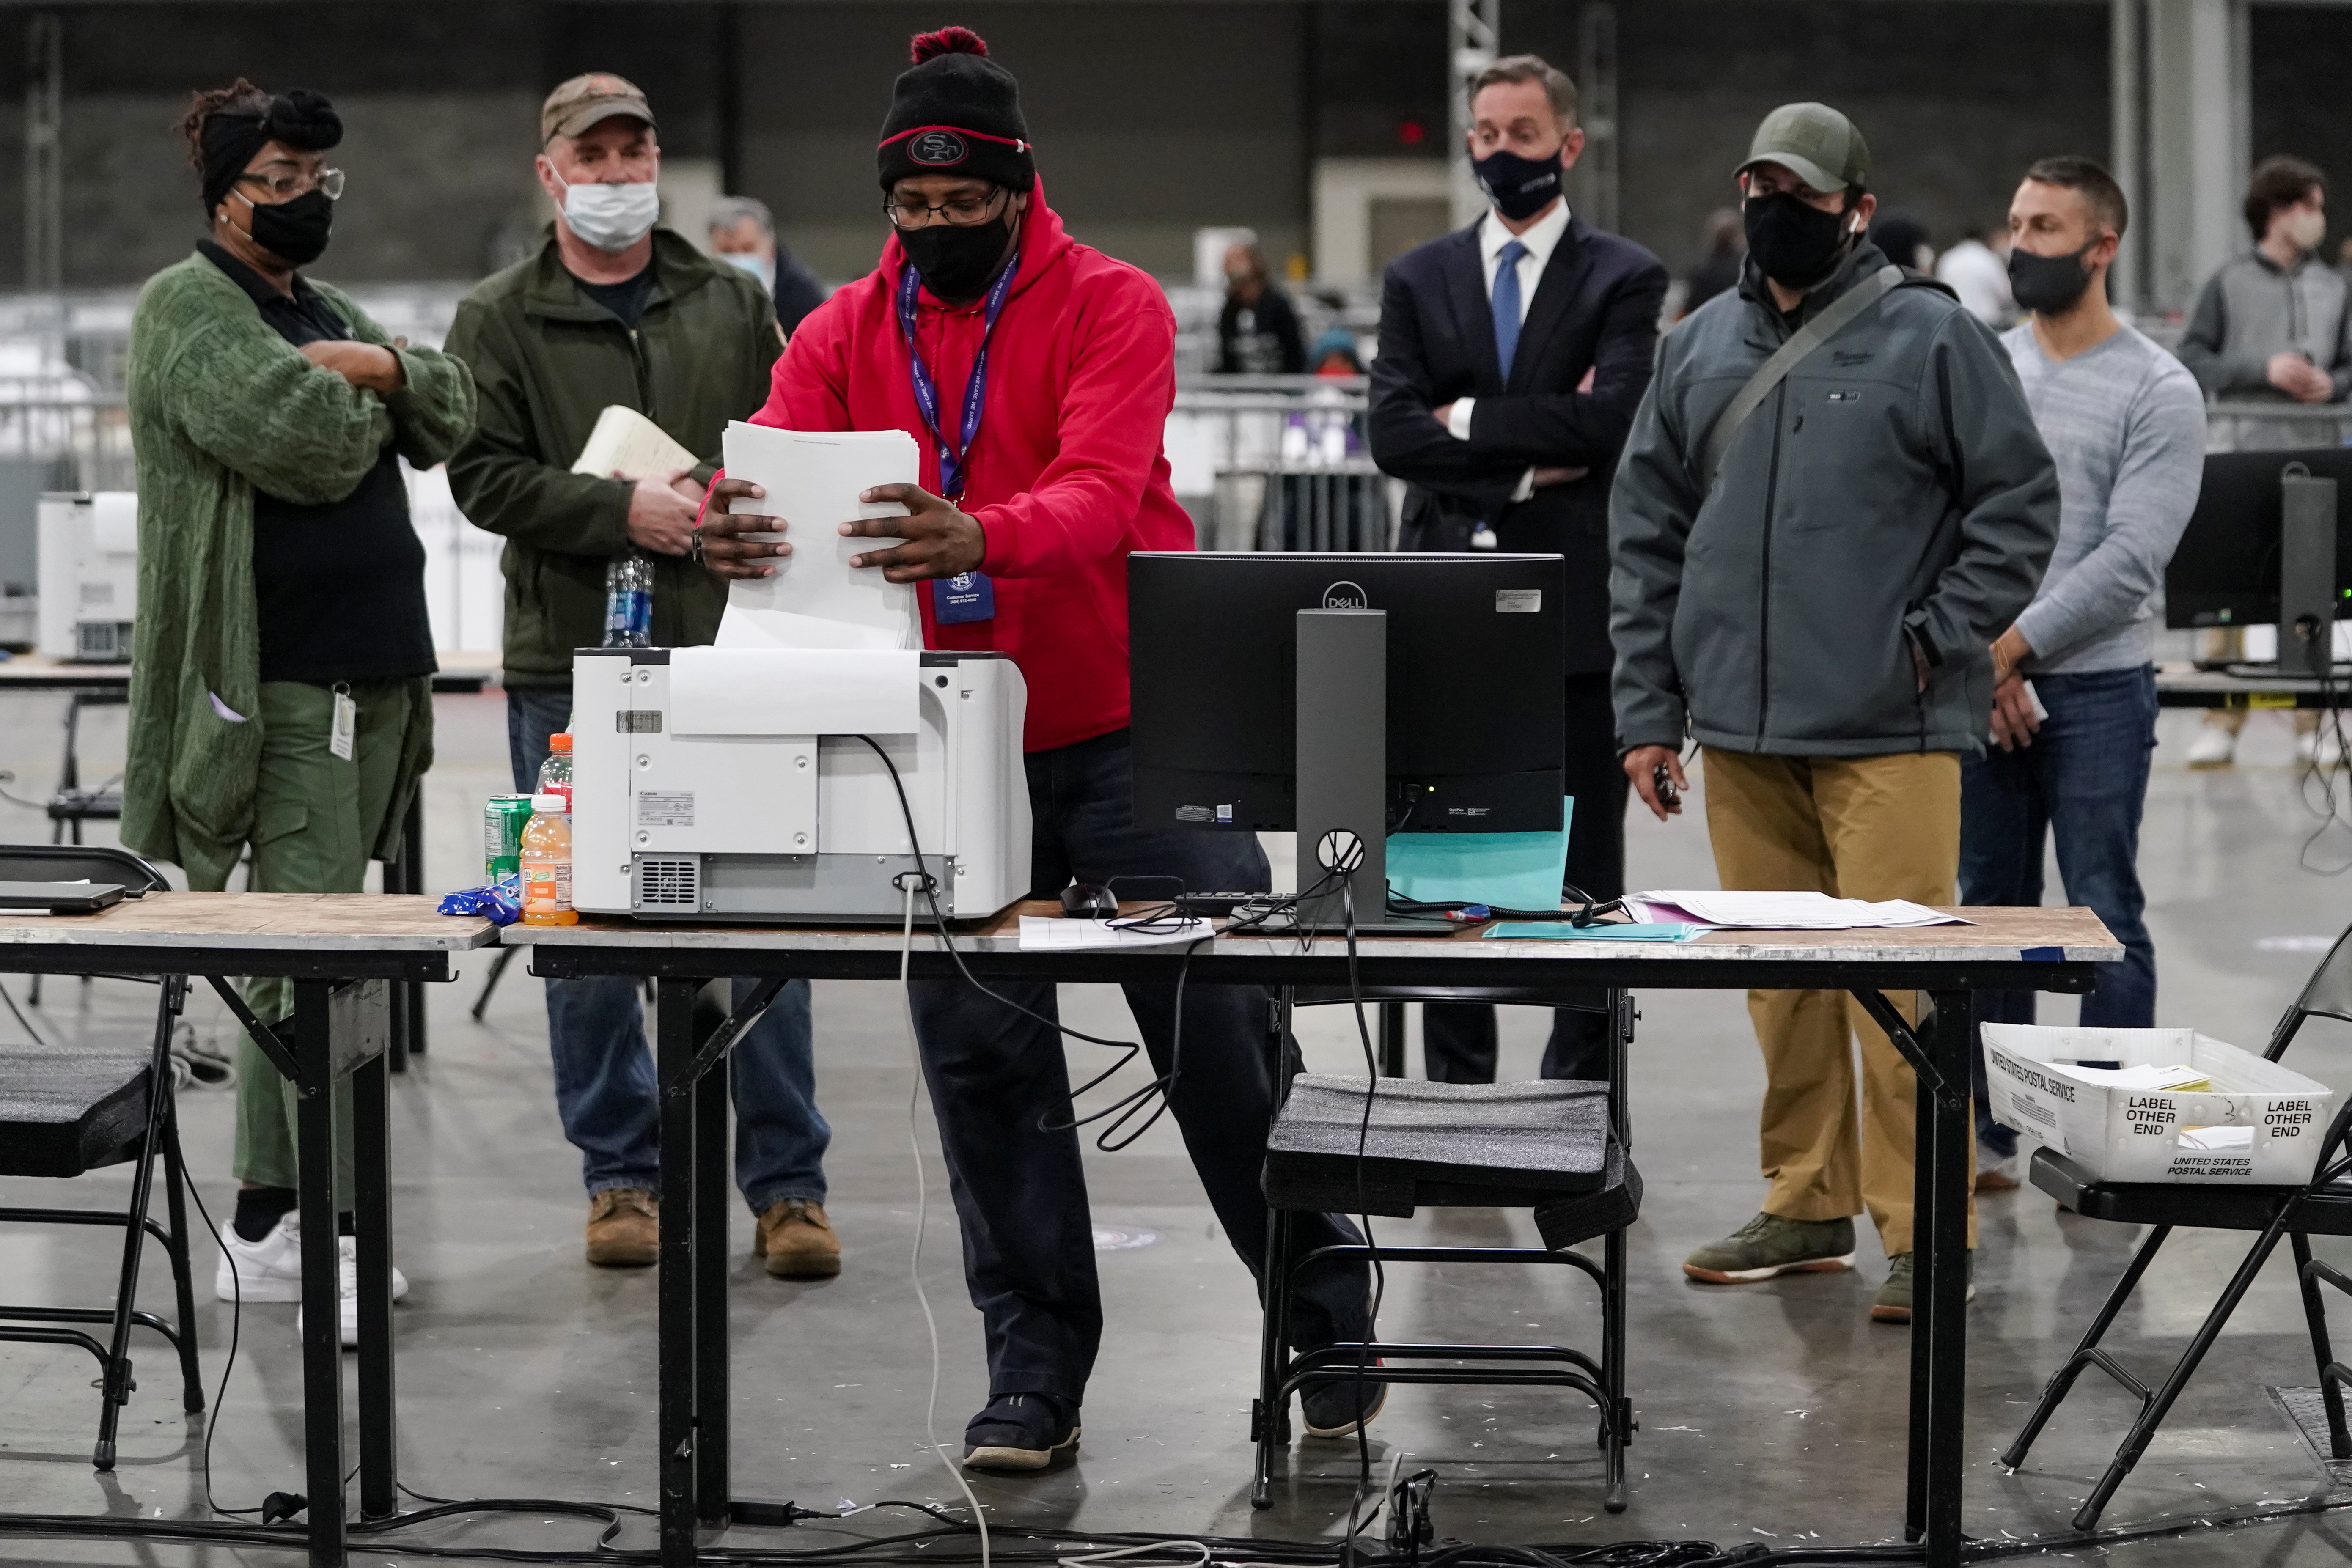 A Fulton County election worker puts absentee ballots in a scanner as election observers look on, at the Georgia World Congress Center in Atlanta, Georgia, U.S., January 5, 2021.  REUTERS/Elijah Nouvelage